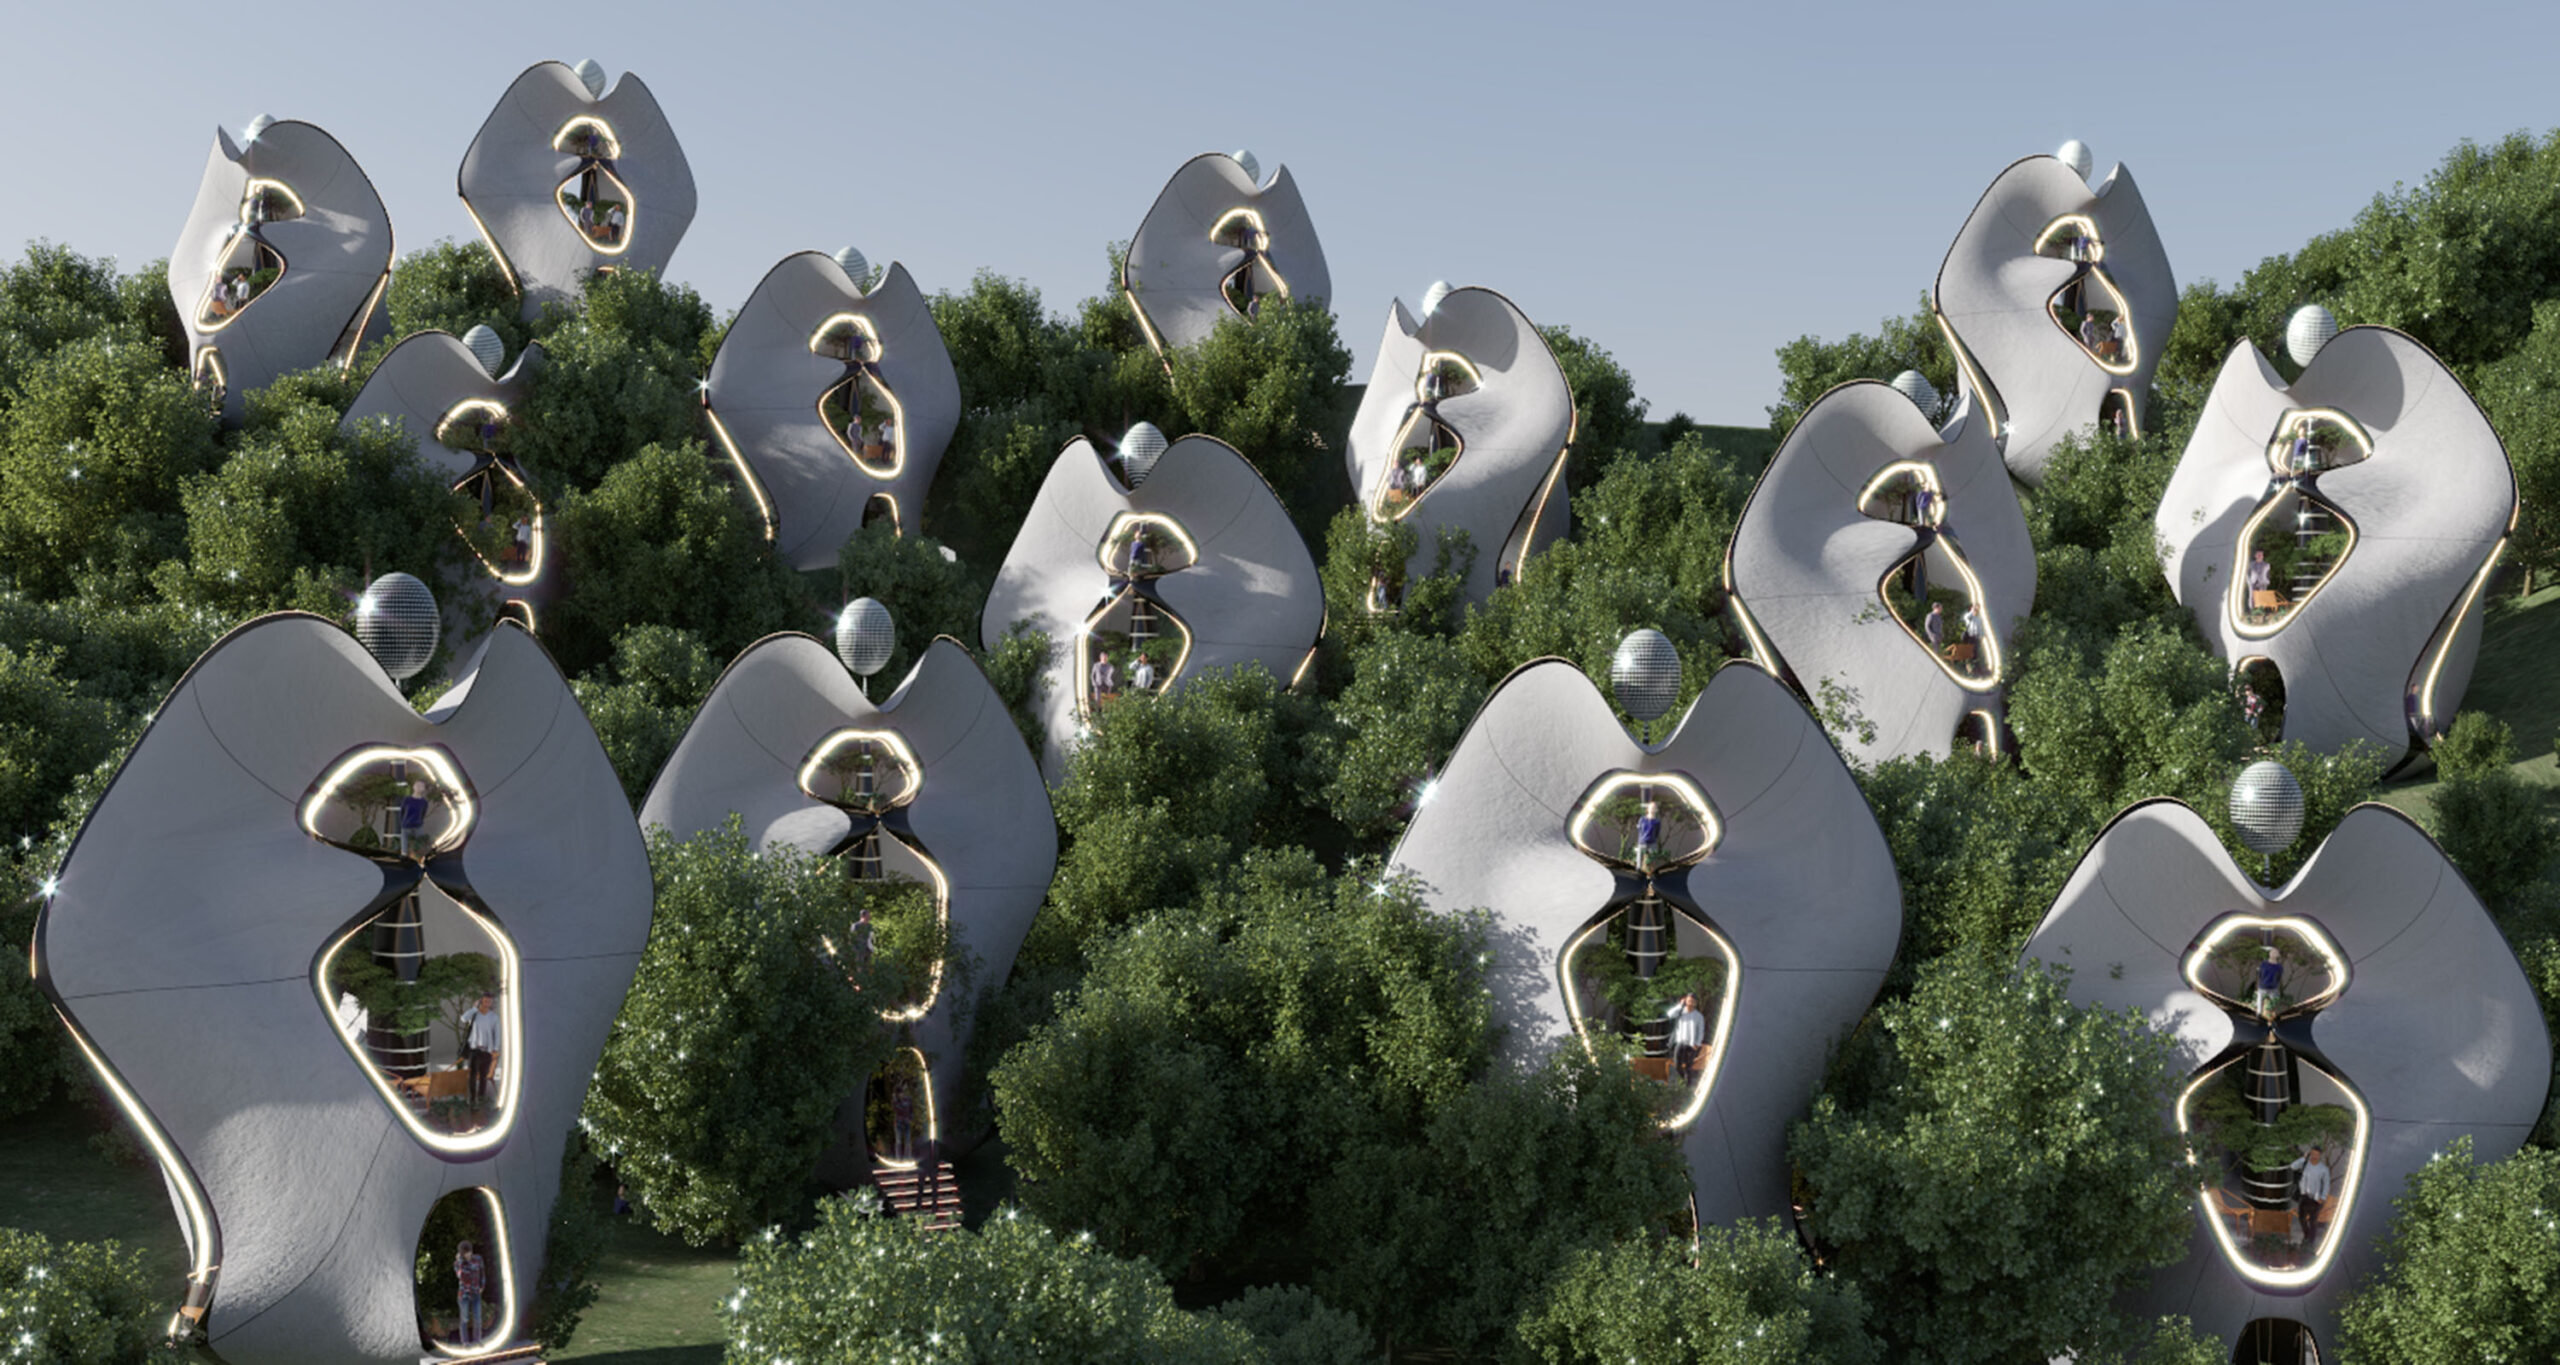 Exosteel i moduli in acciaio stampato in 3D - credits Mask Architects